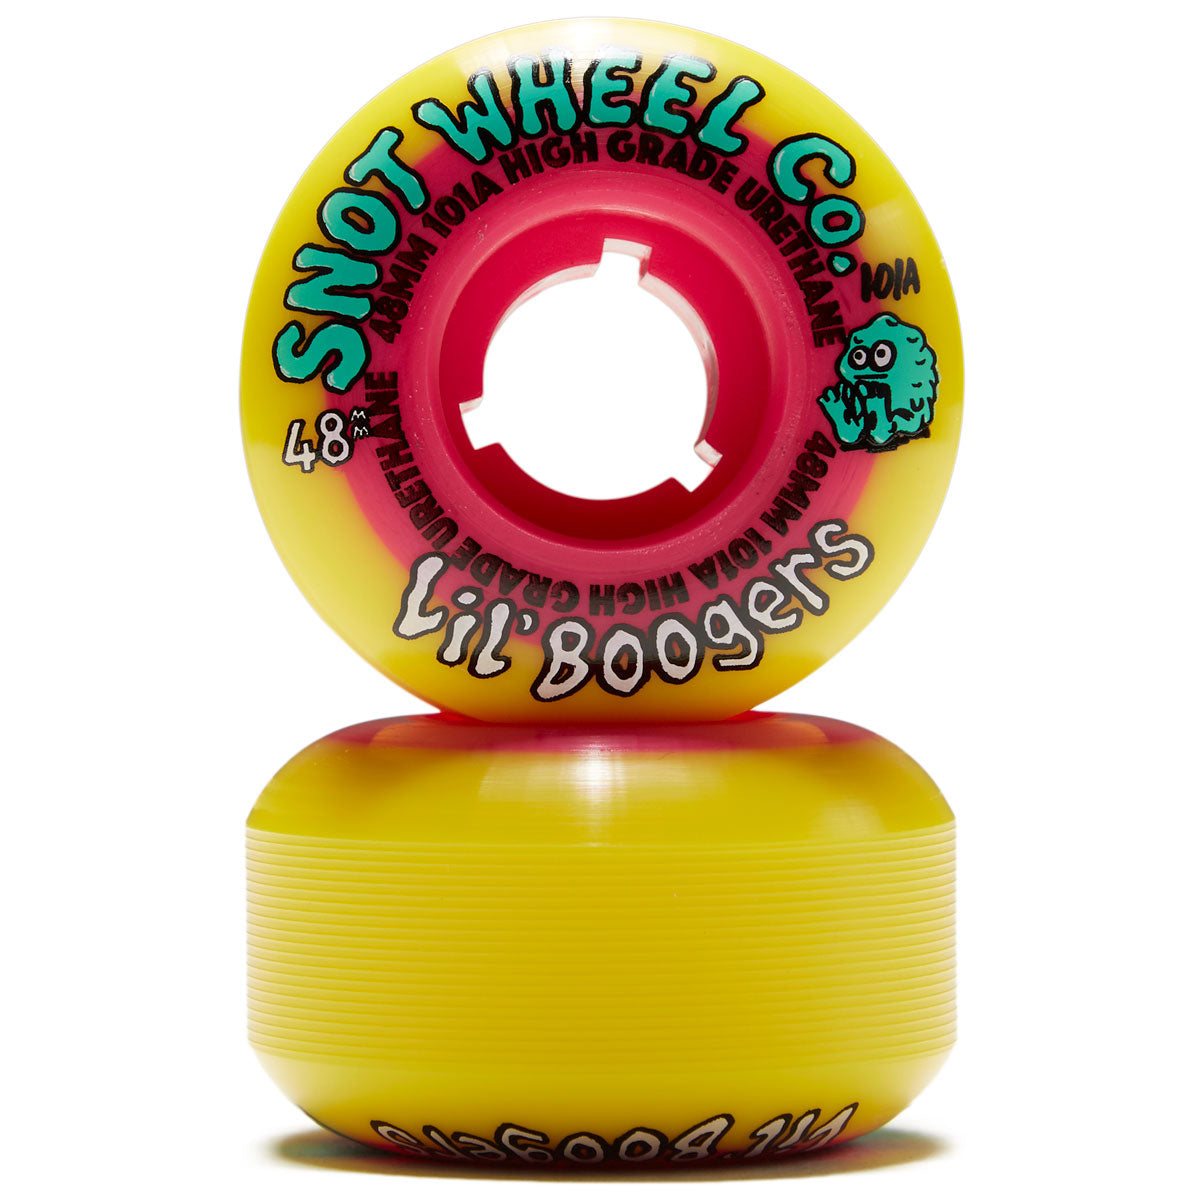 Snot Lil Boogers 101A skateboard Wheels - Pink/Yellow - 48mm image 2